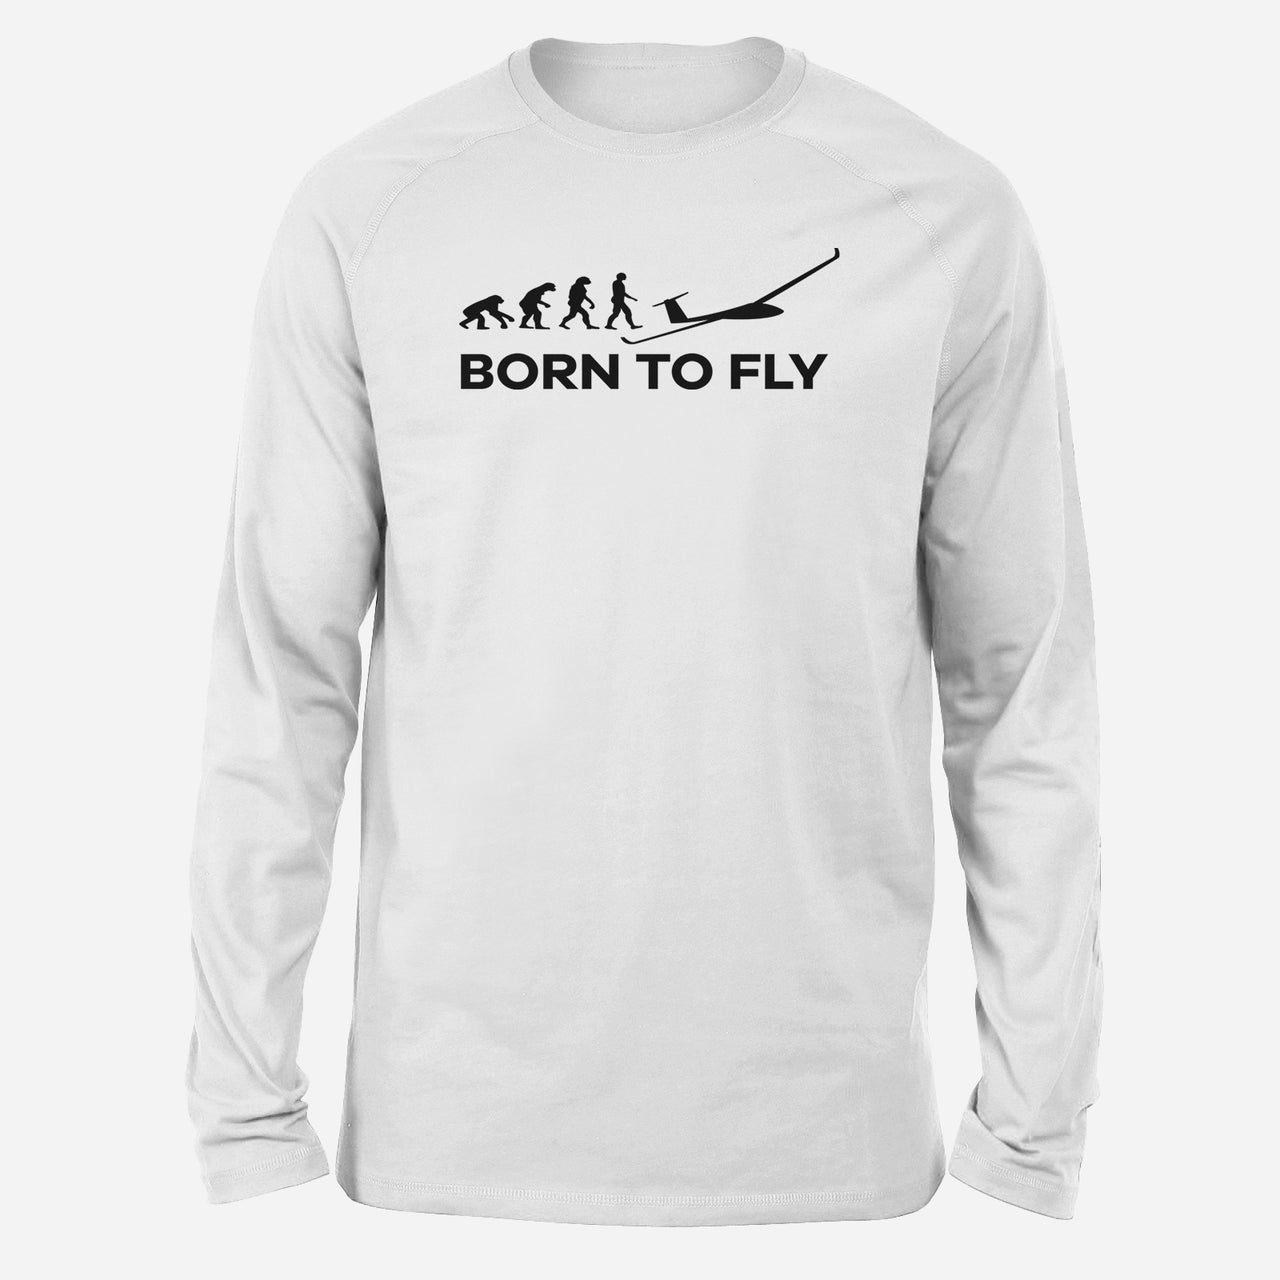 Born To Fly Glider Designed Long-Sleeve T-Shirts